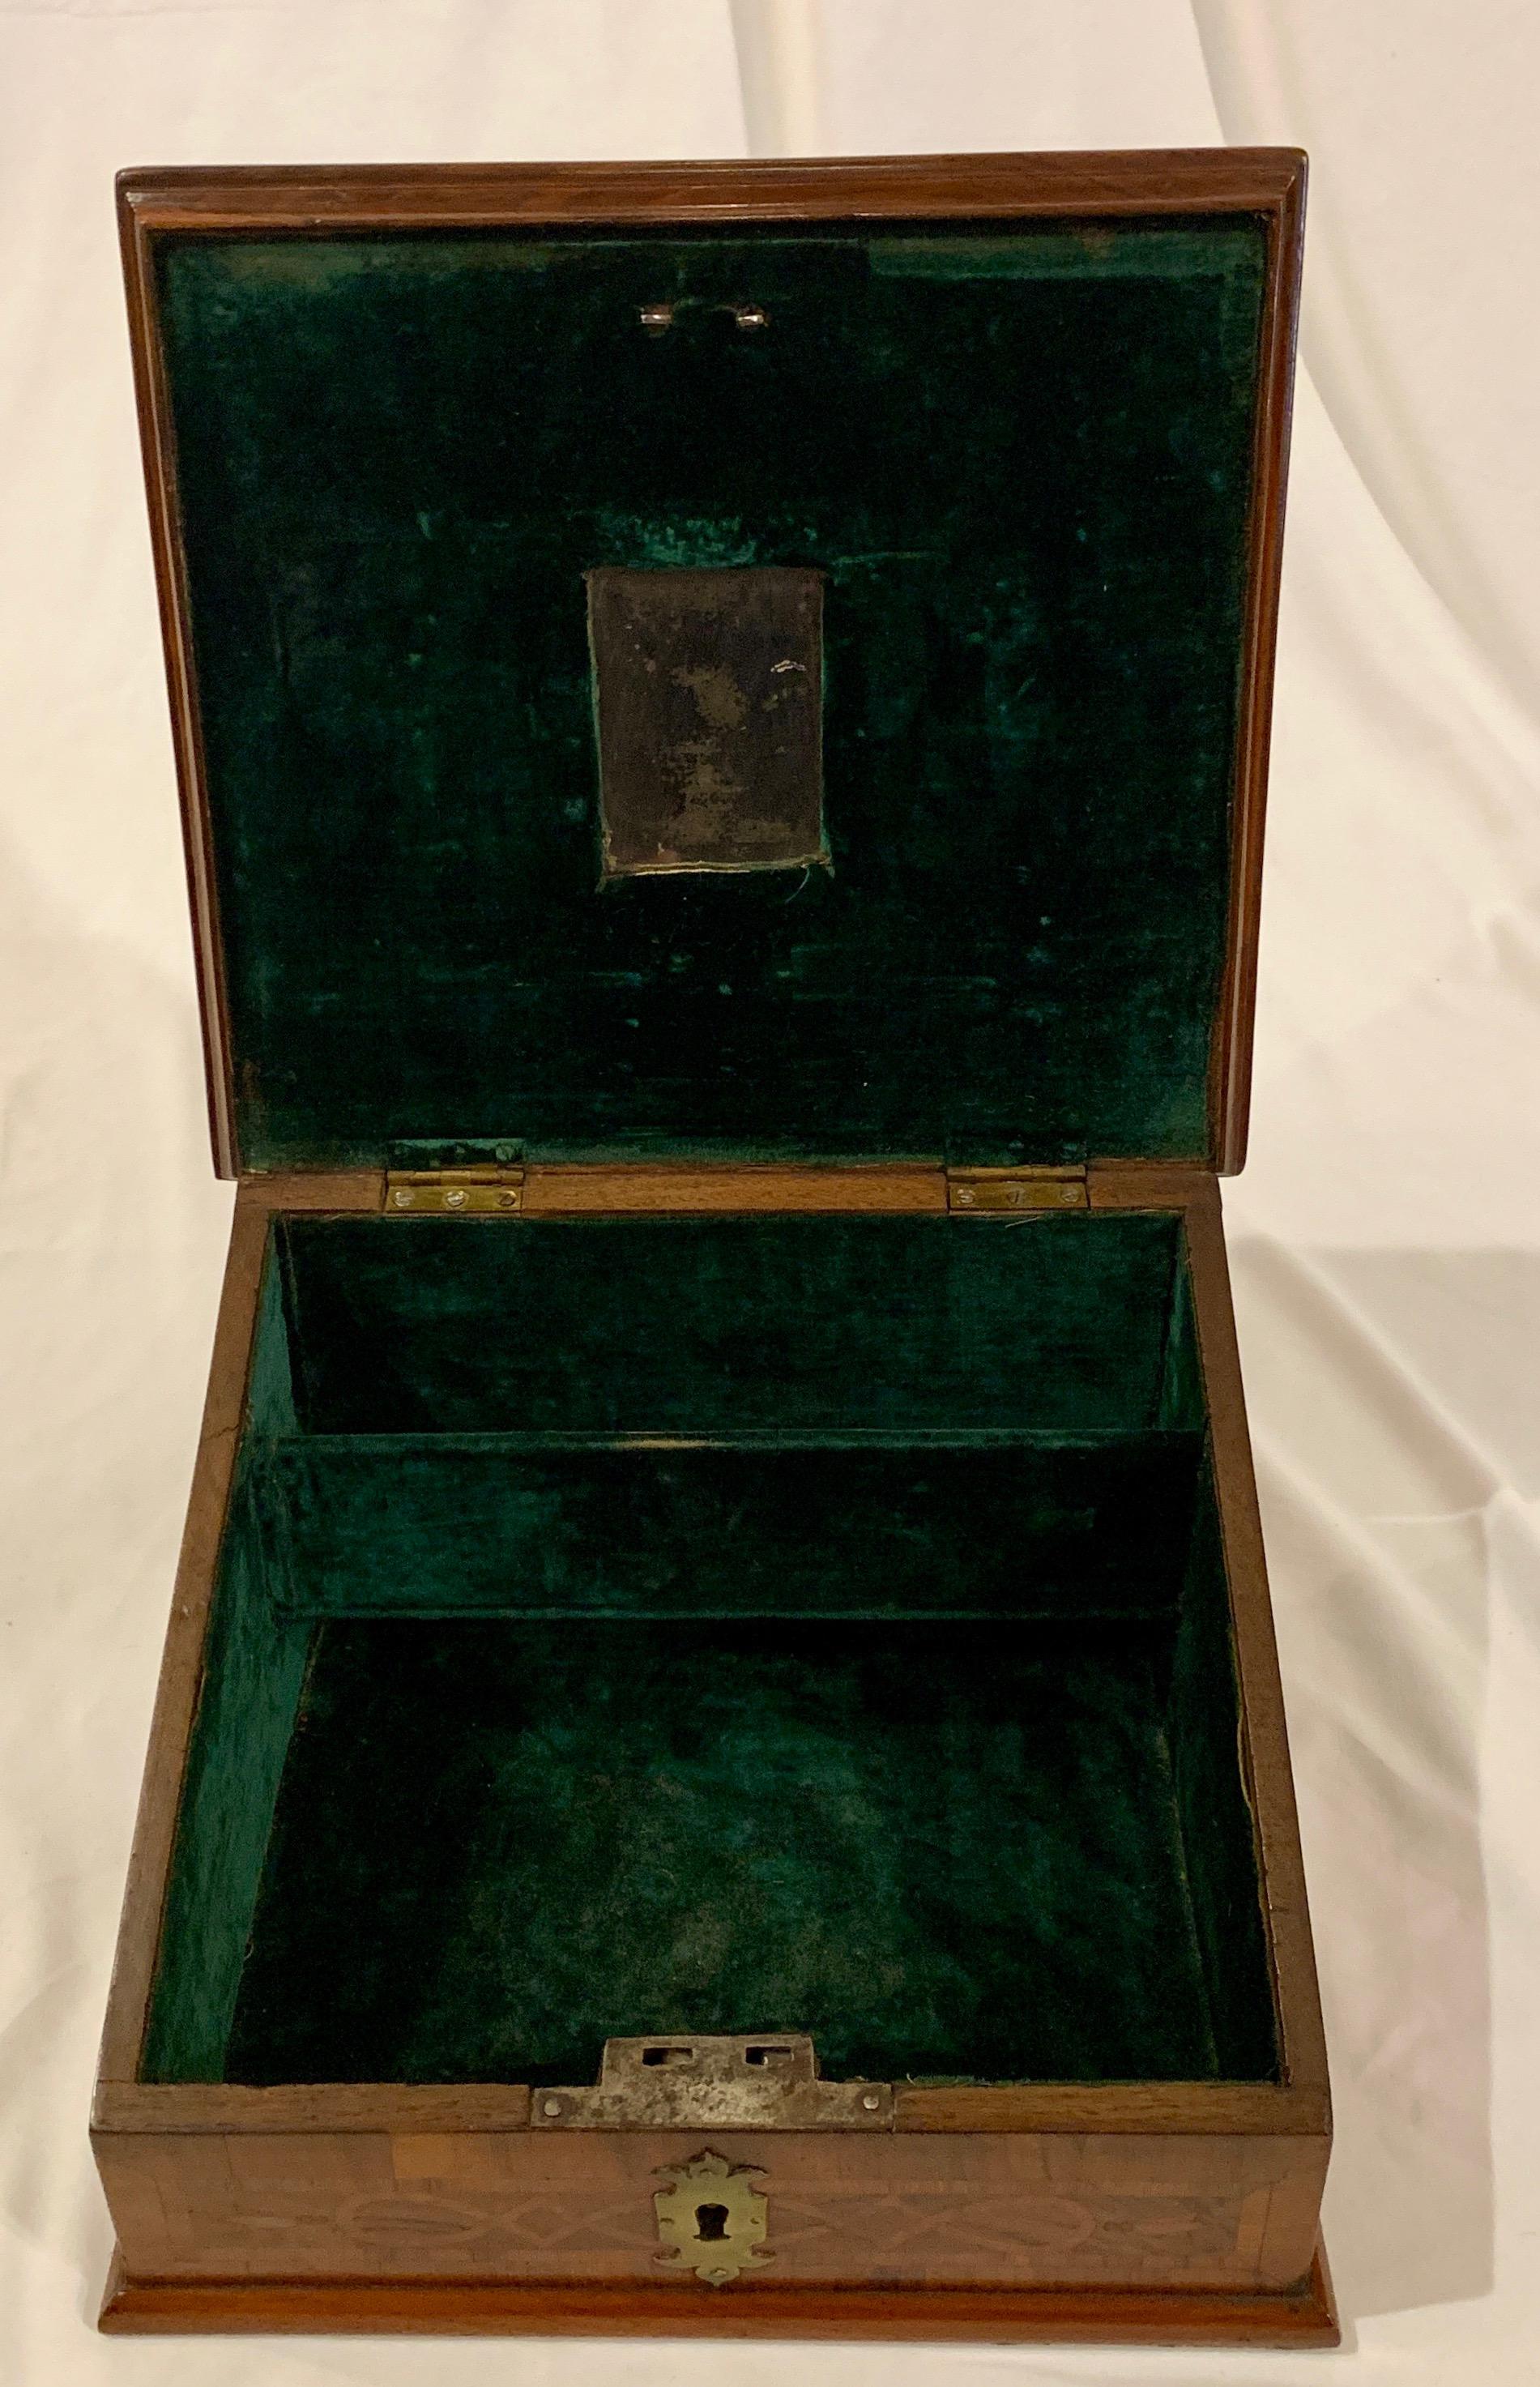 19th Century Antique English Sewing Box or Jewel Box, circa 1850-1860 For Sale